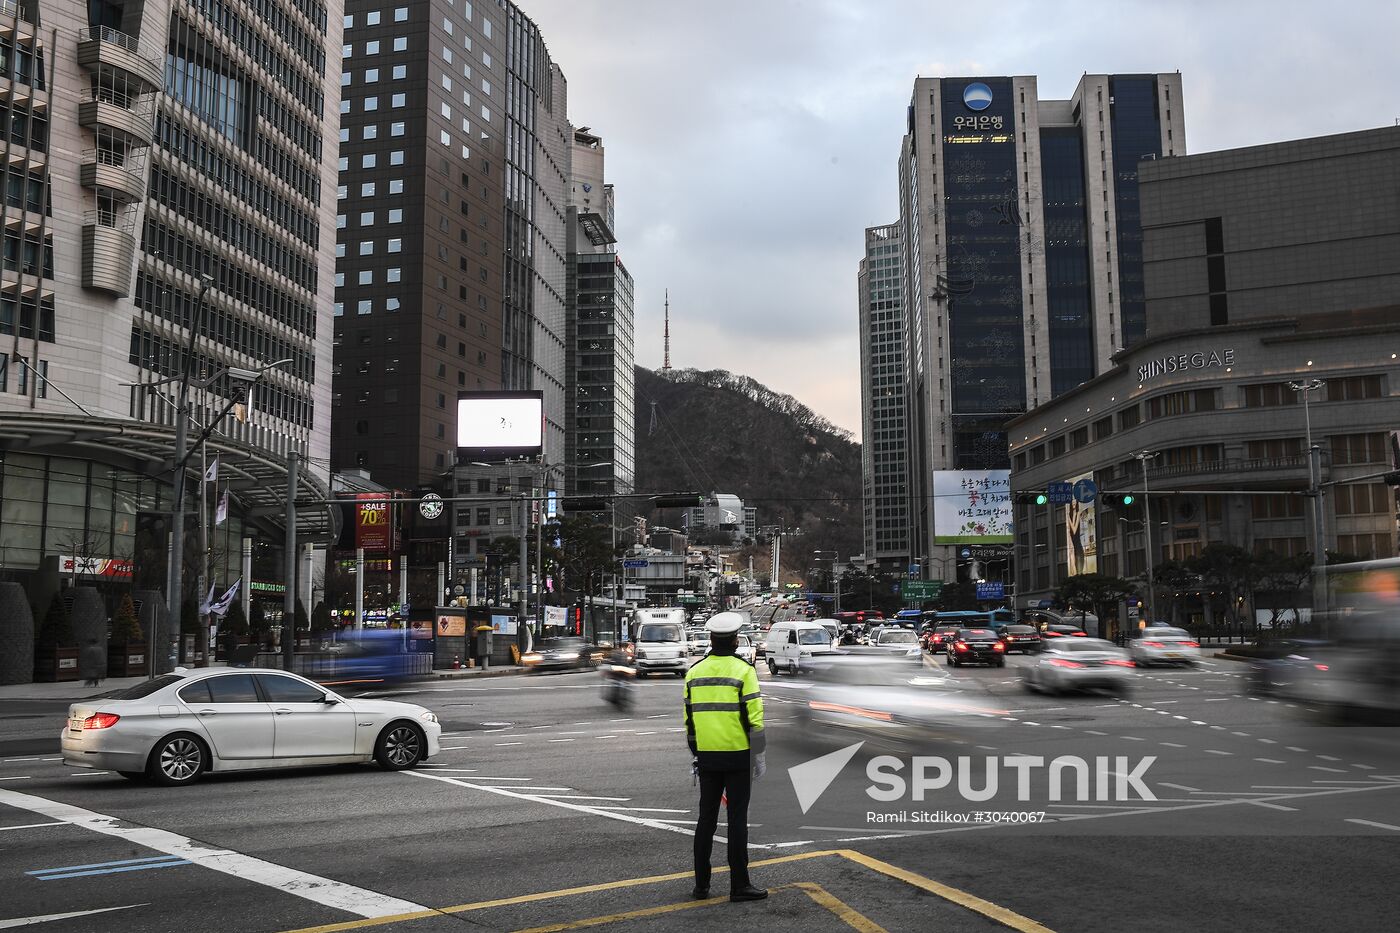 Cities of the world. Seoul